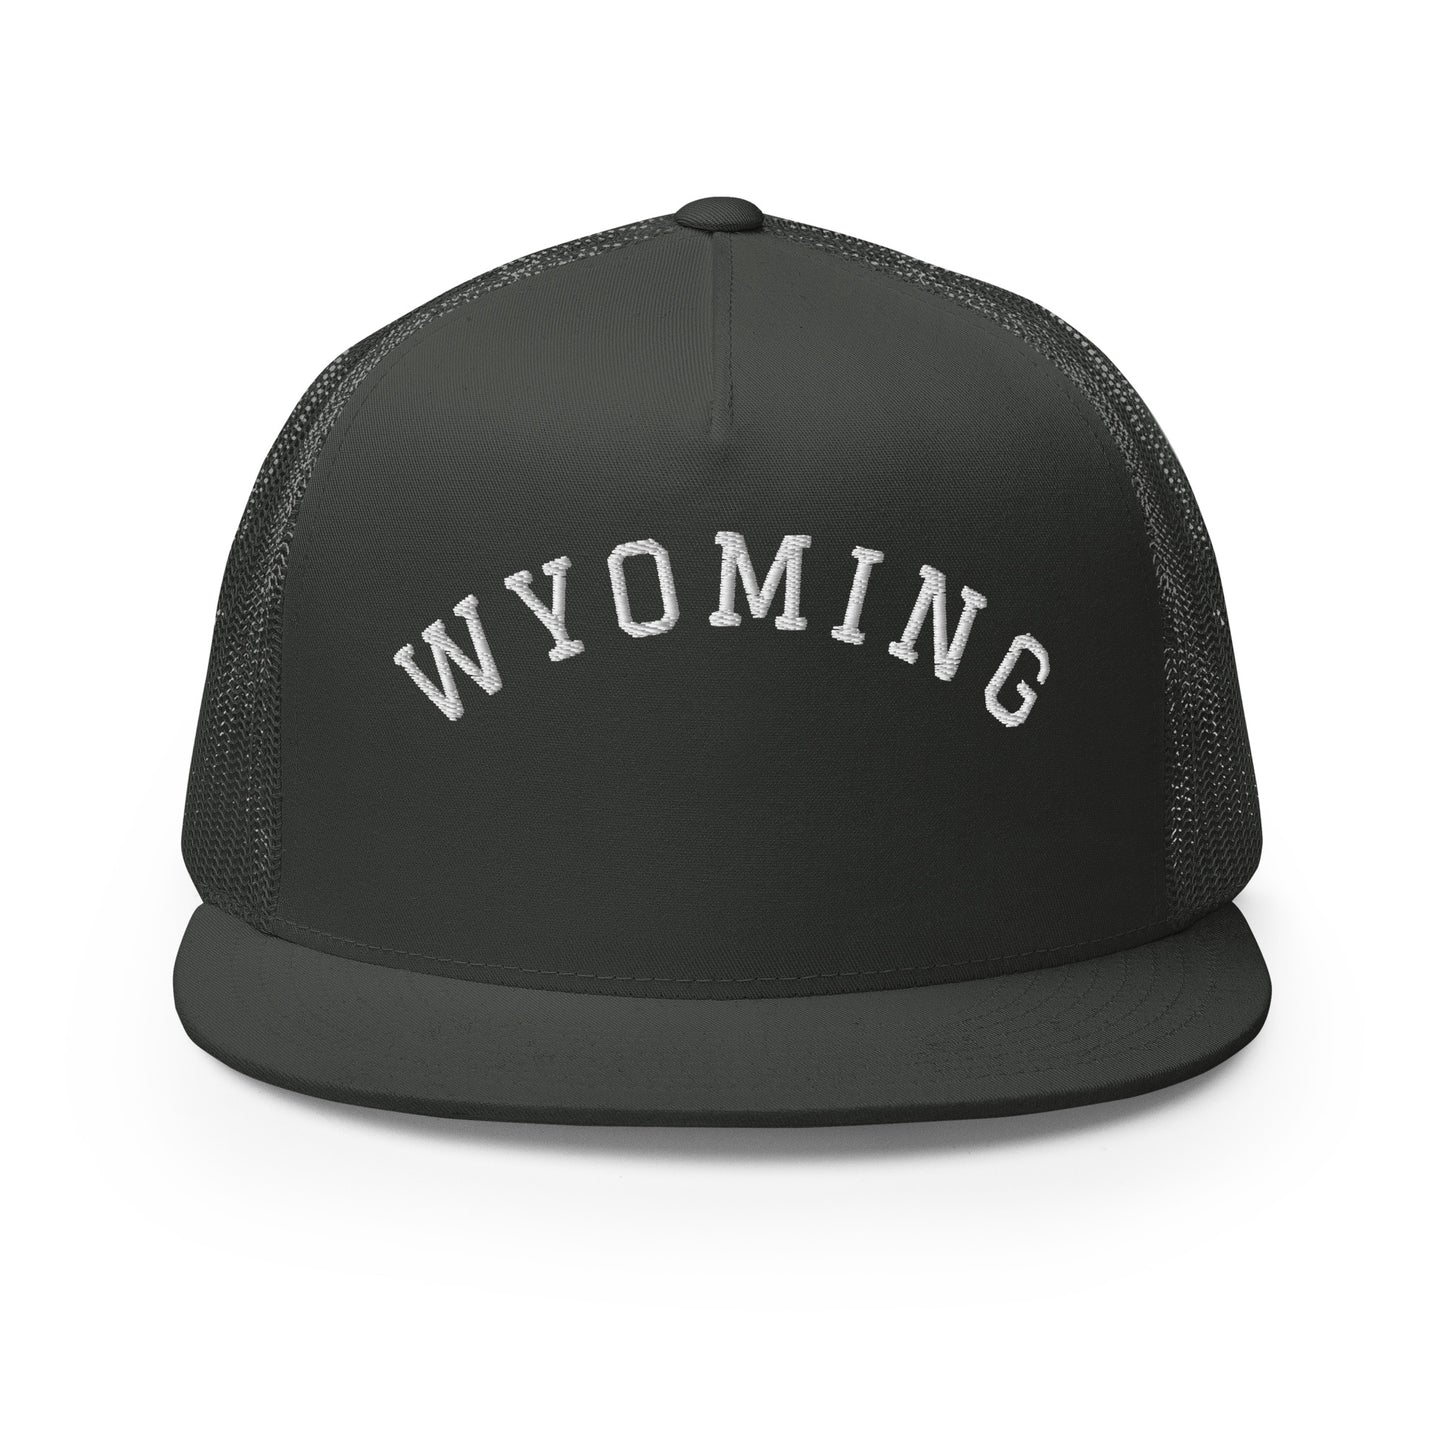 Wyoming Arch High 5 Panel A-Frame Snapback Trucker Hat